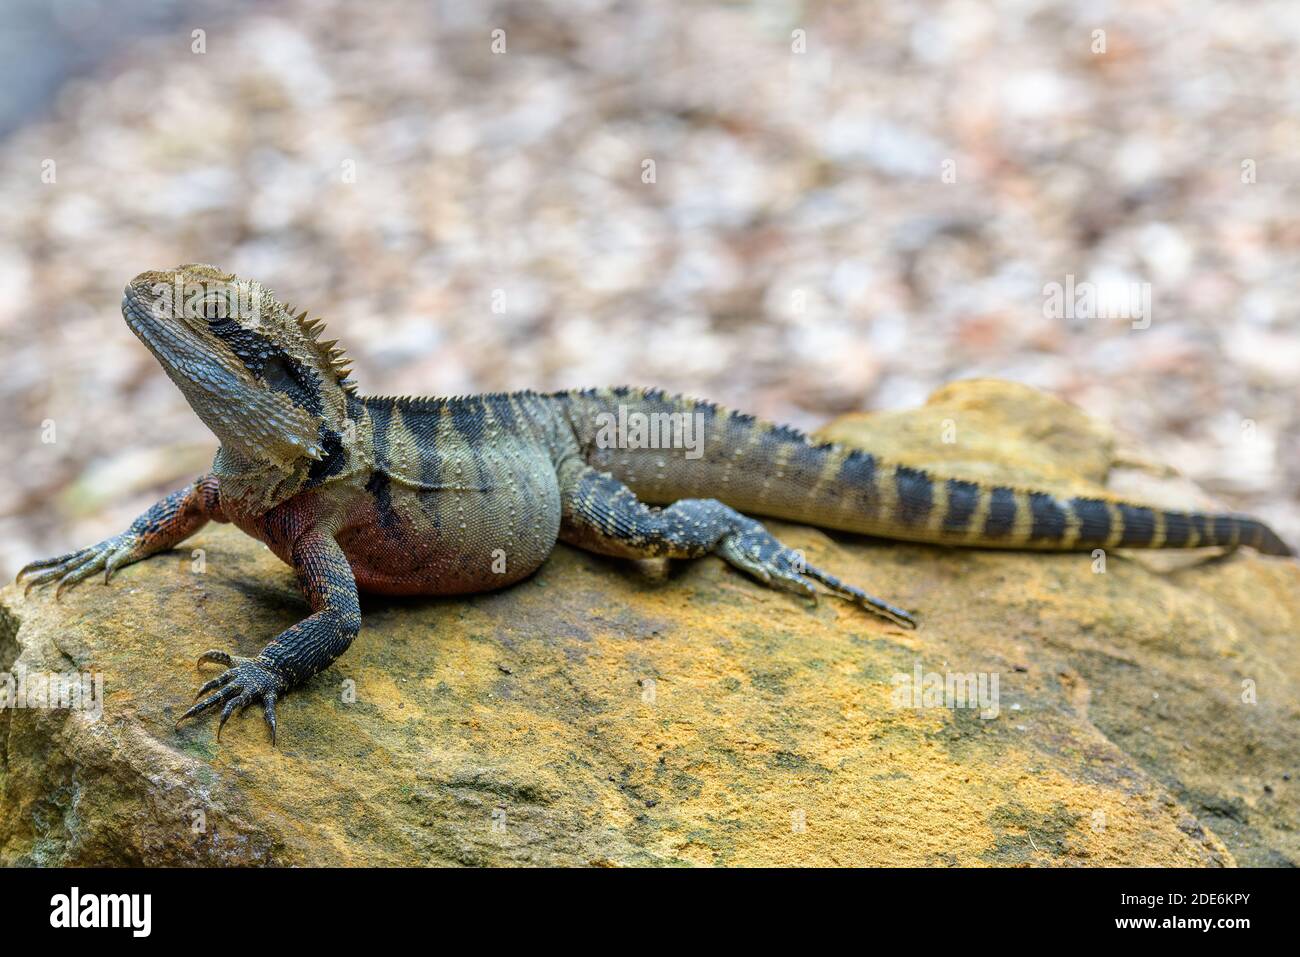 A top view of a male brown eastern water dragon basking on the ground, New South Wales, Australia. Stock Photo